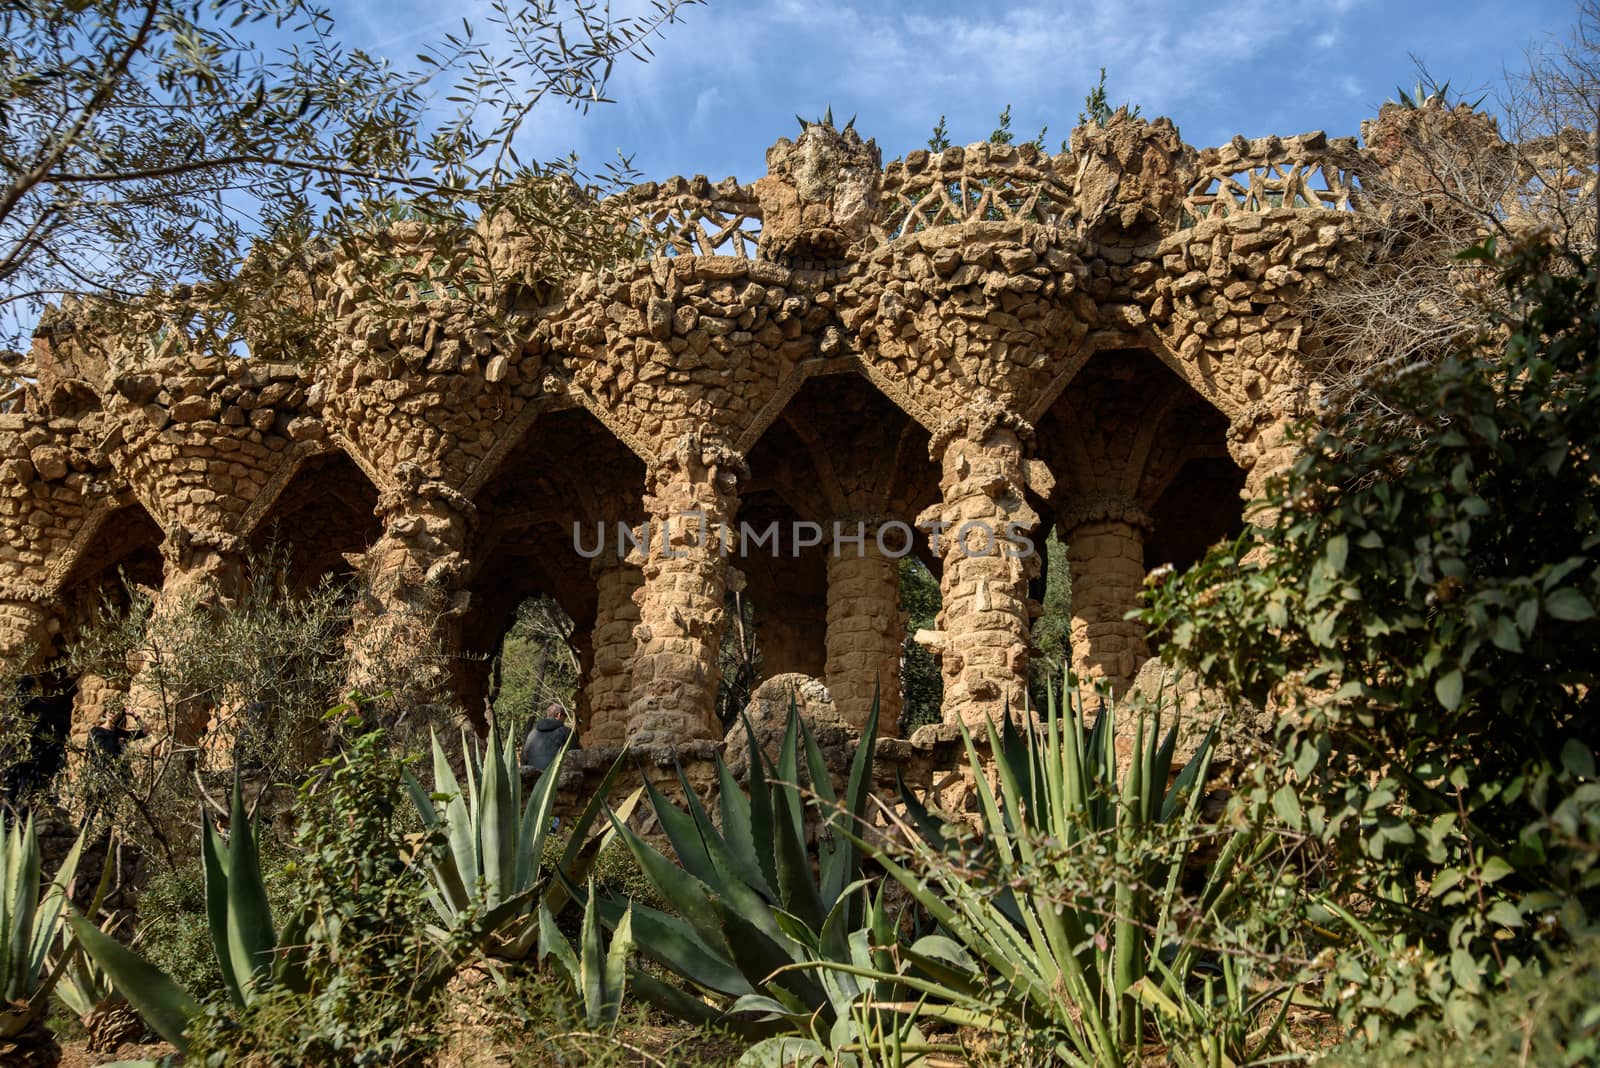 Park Guell, populart tourit attraction in Barcelona, Spain.